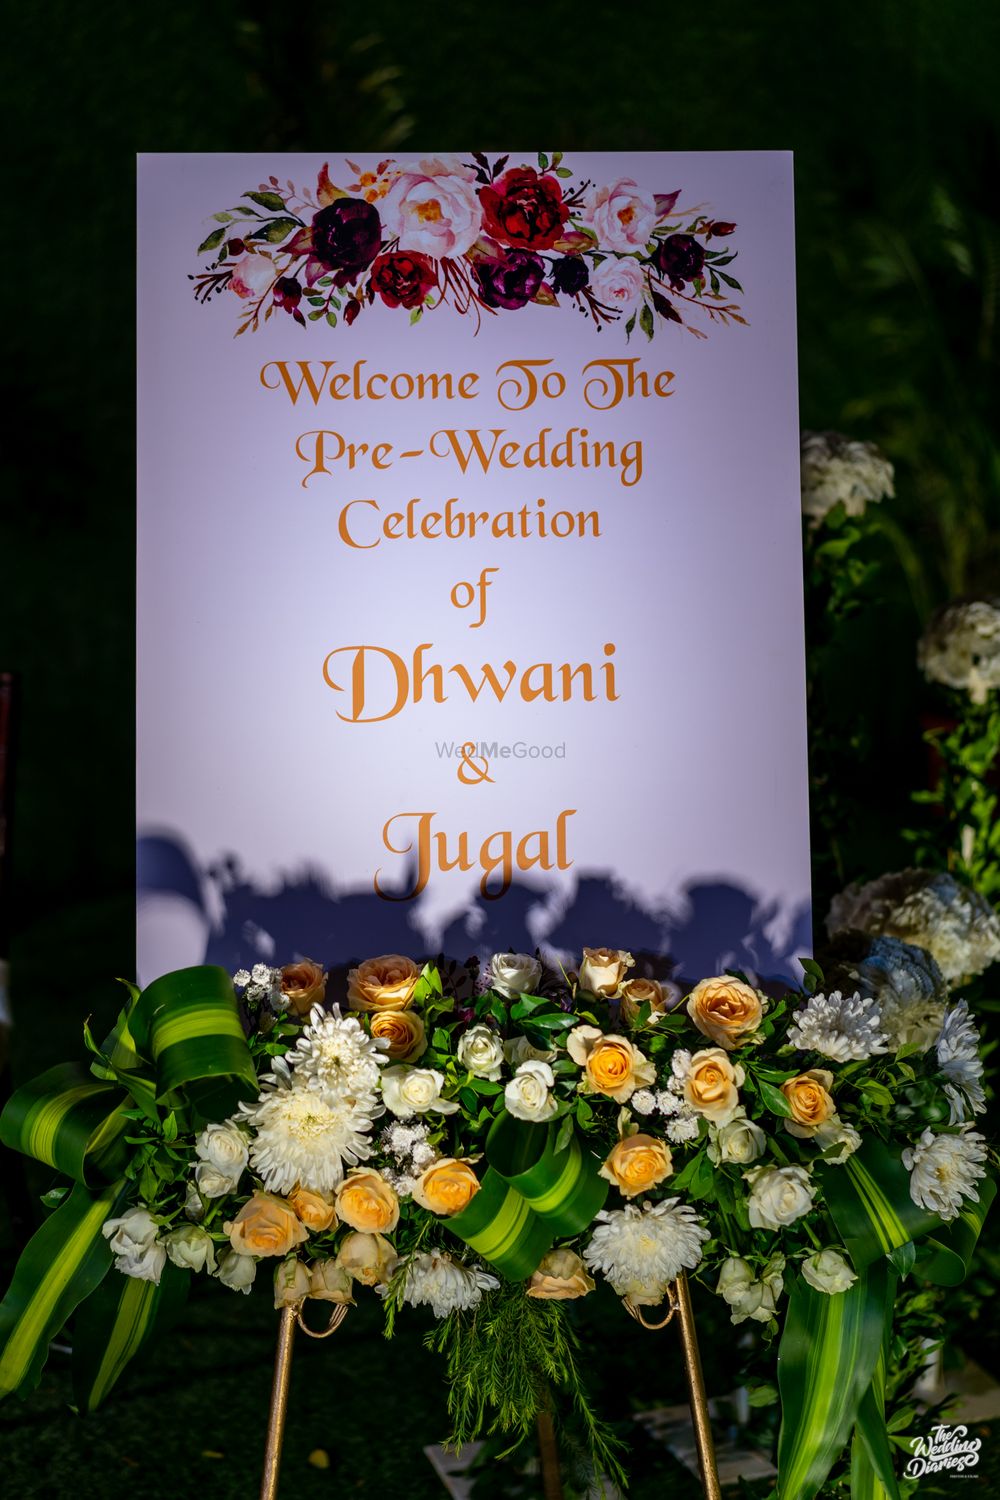 Photo From Dhwani & Jugal - By Events by TWD